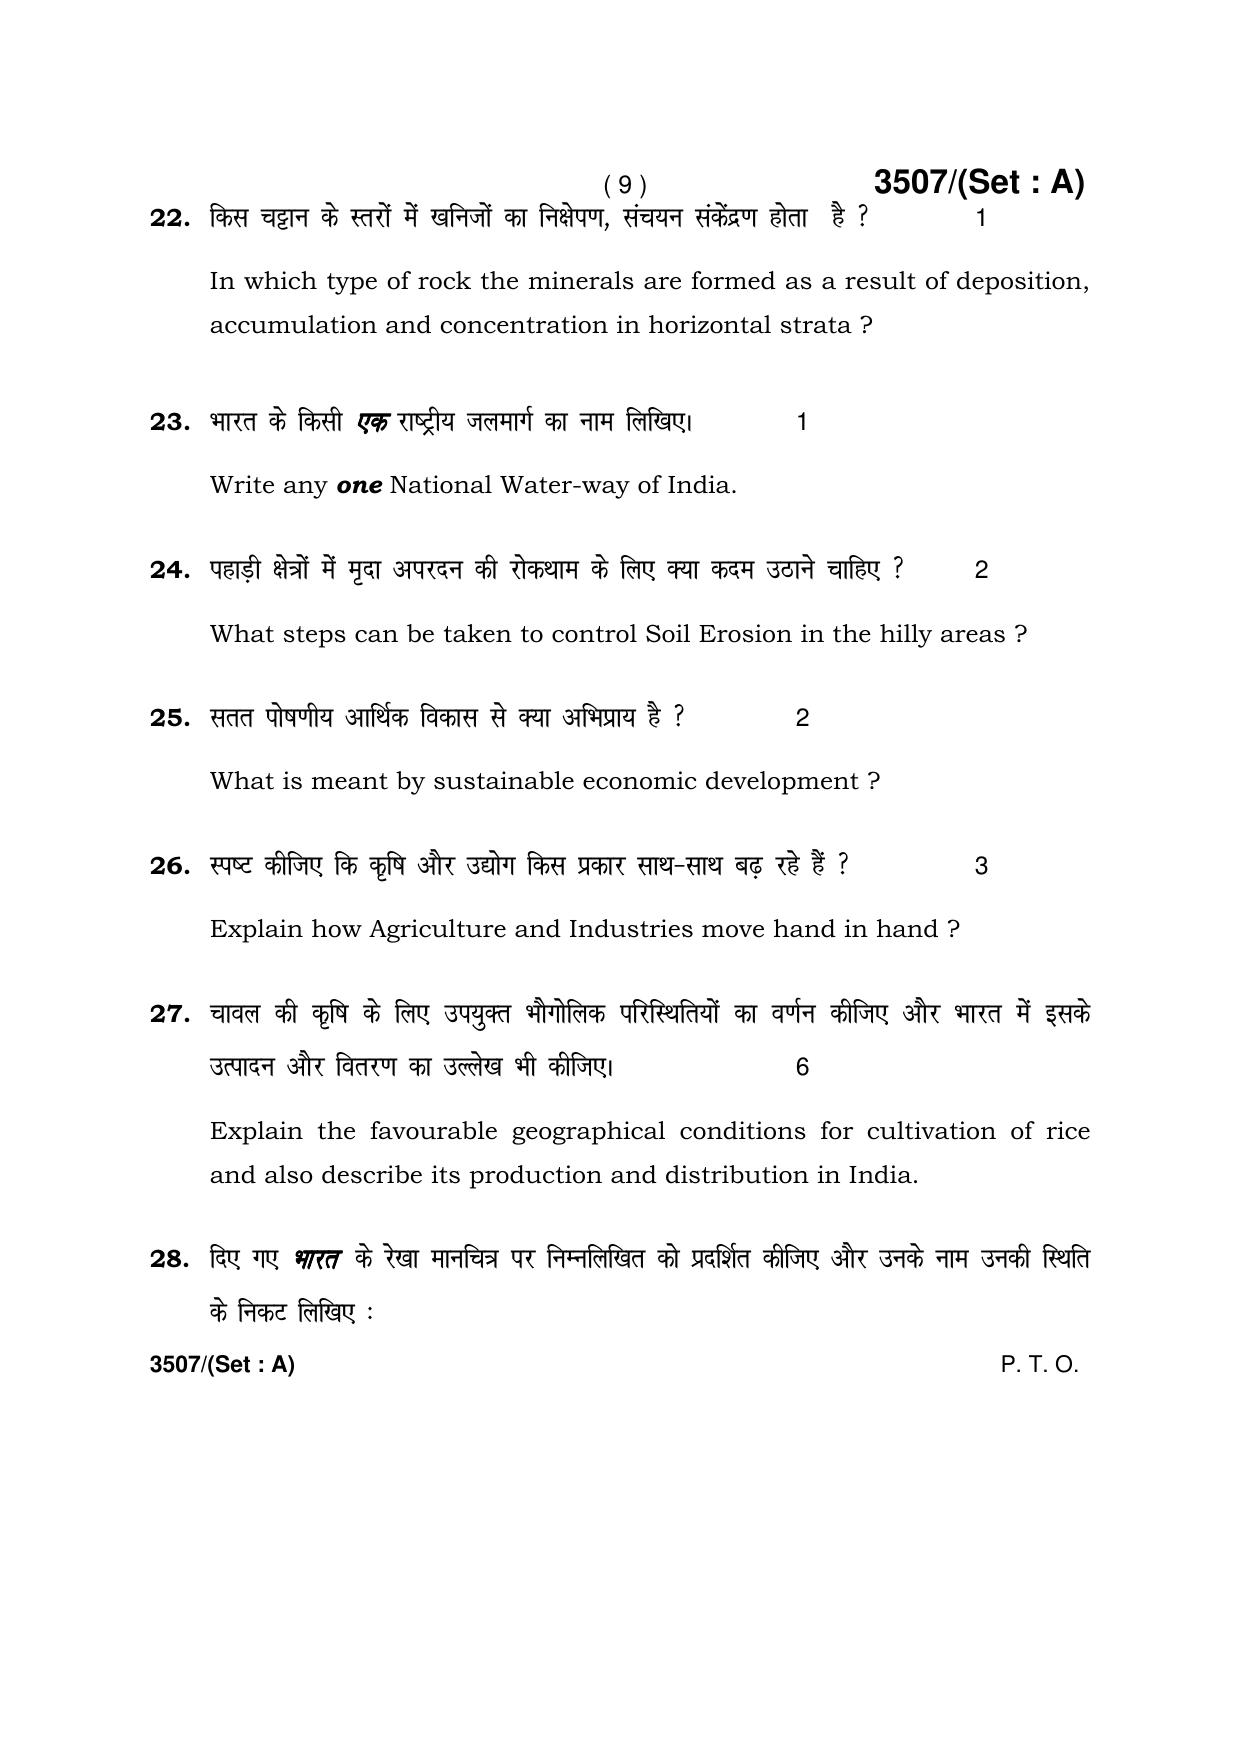 Haryana Board HBSE Class 10 Social Science -A 2018 Question Paper - Page 9